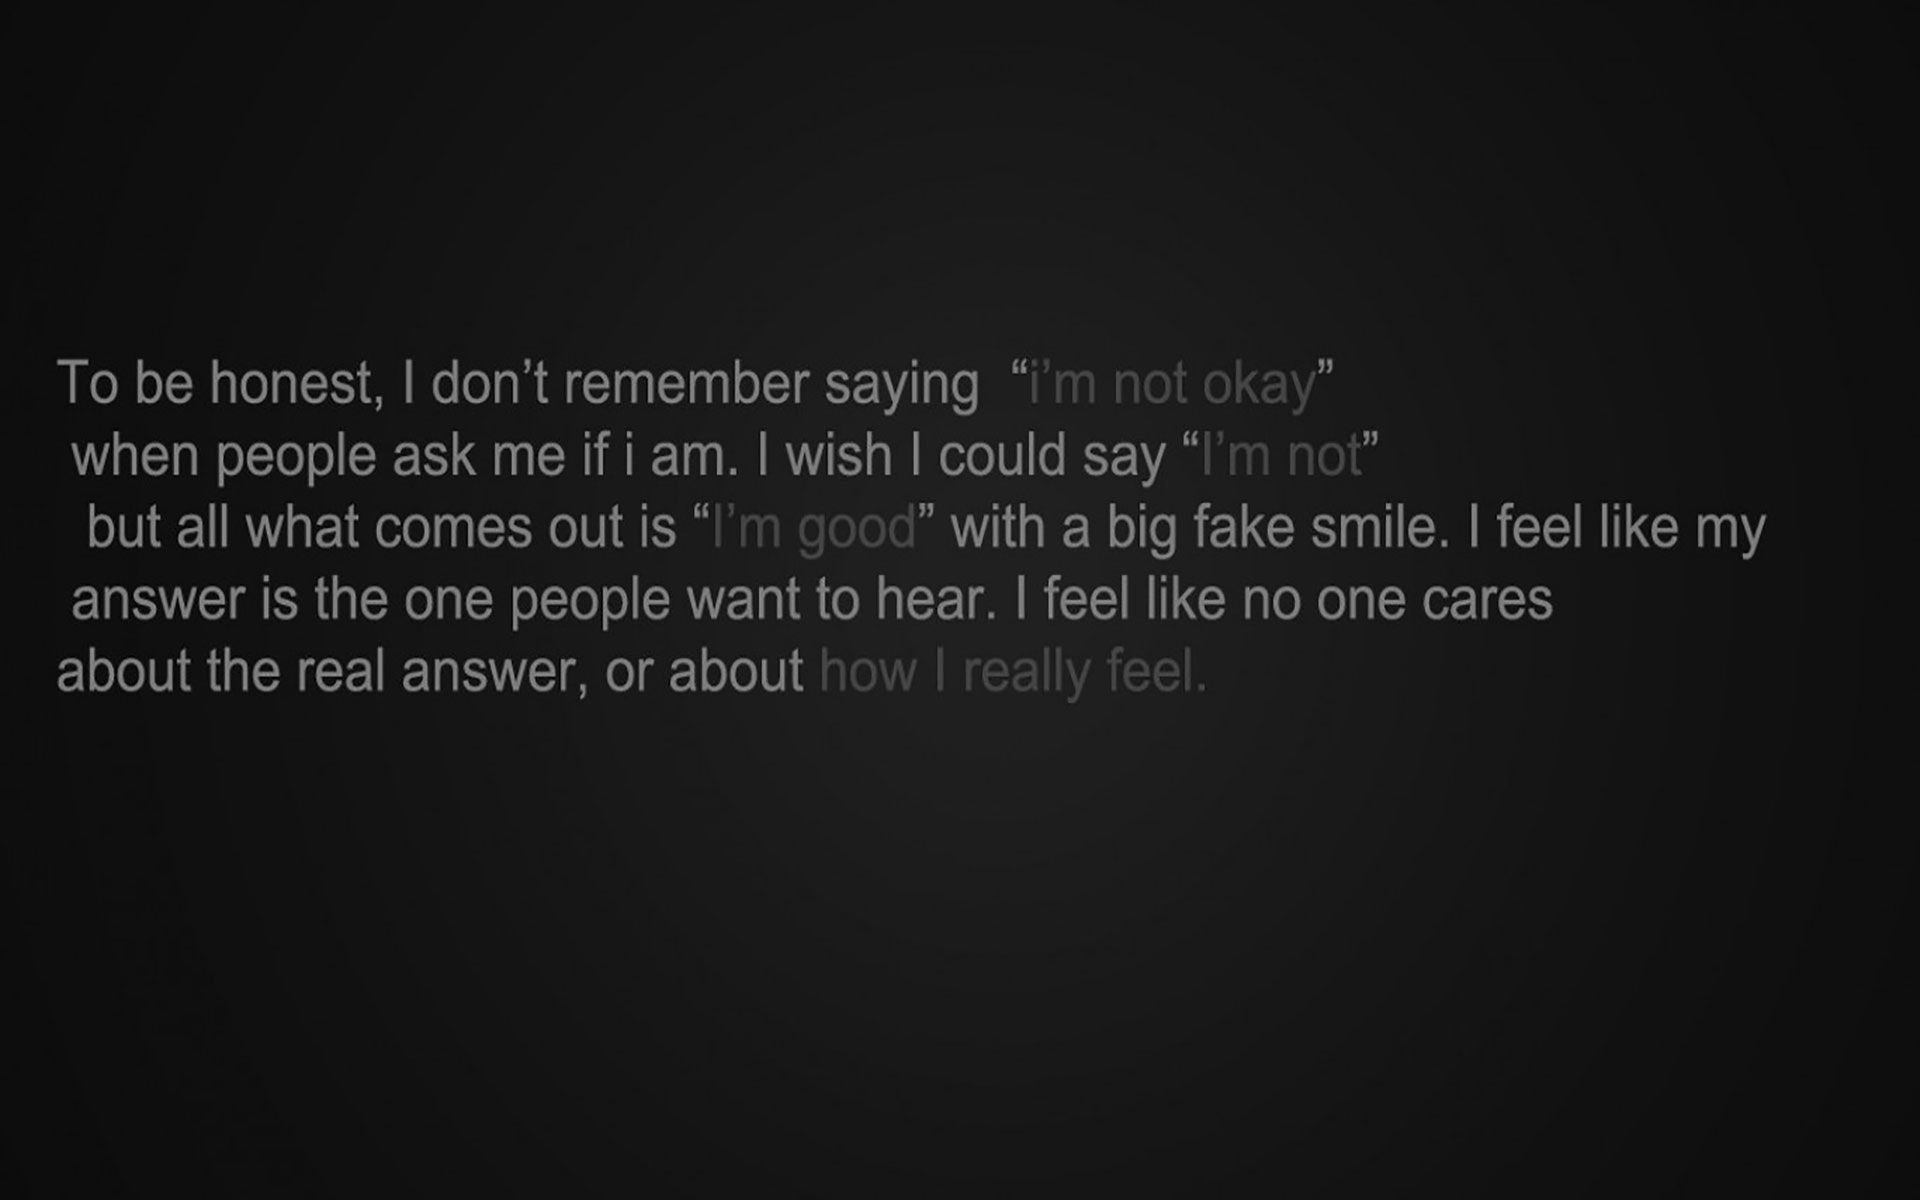 A quote about being honest and not feeling okay. - Emo